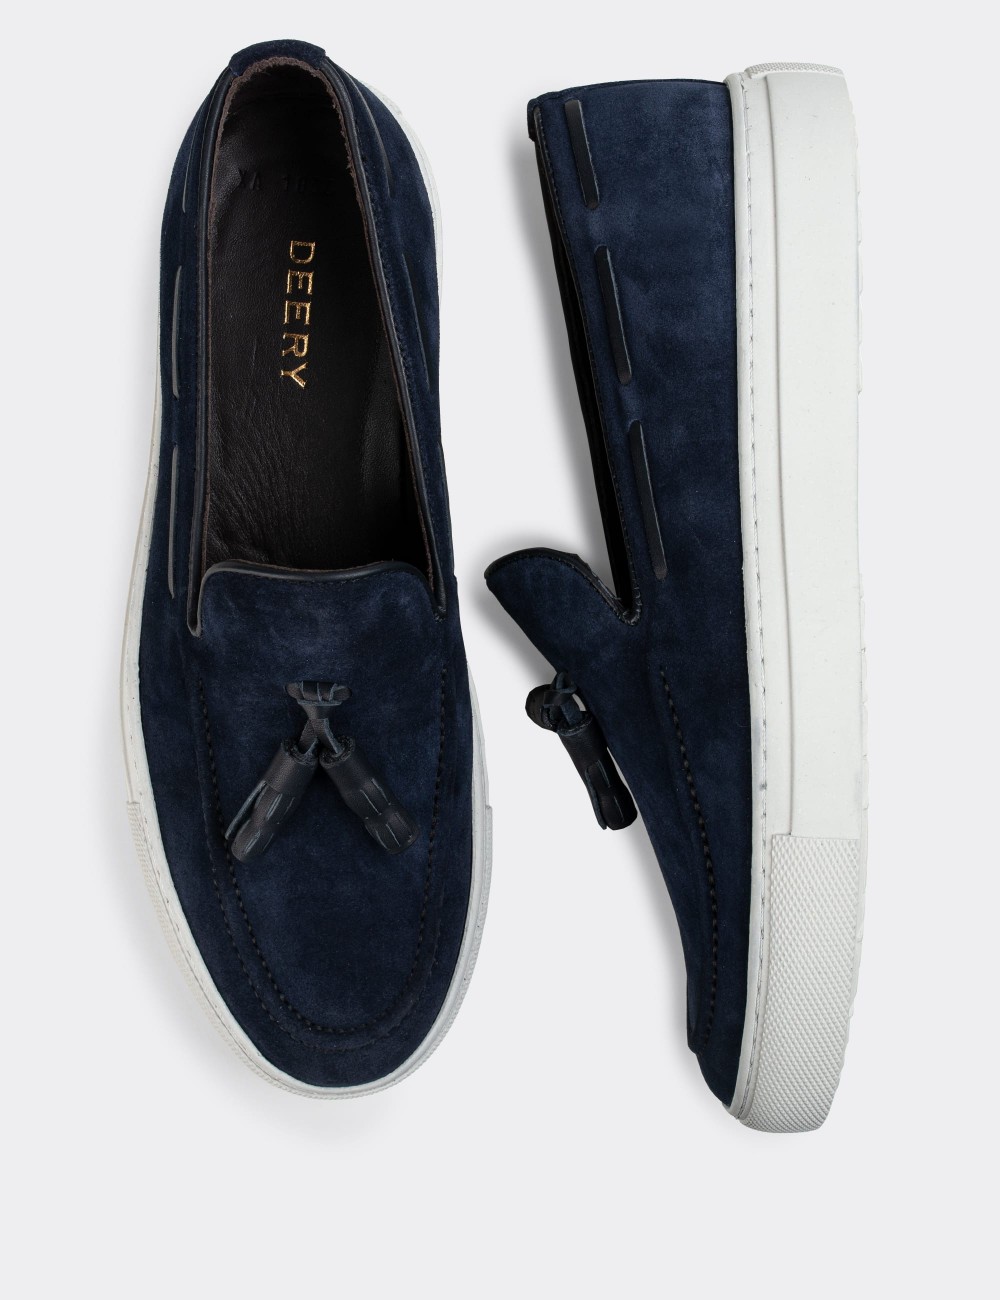 Navy Suede Leather Sneakers - 01836MLCVC01